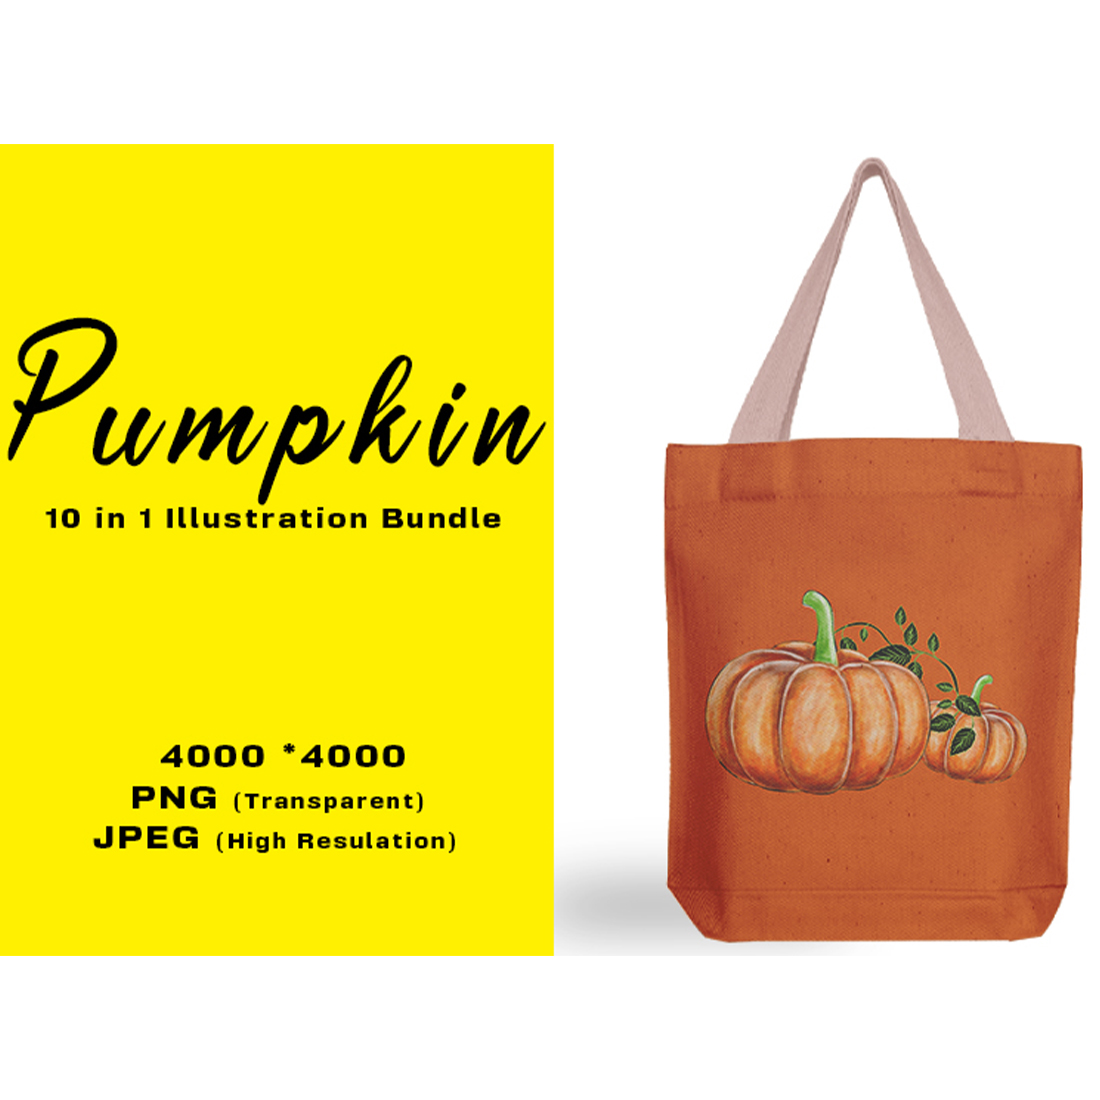 Image of bag with exquisite print with pumpkins